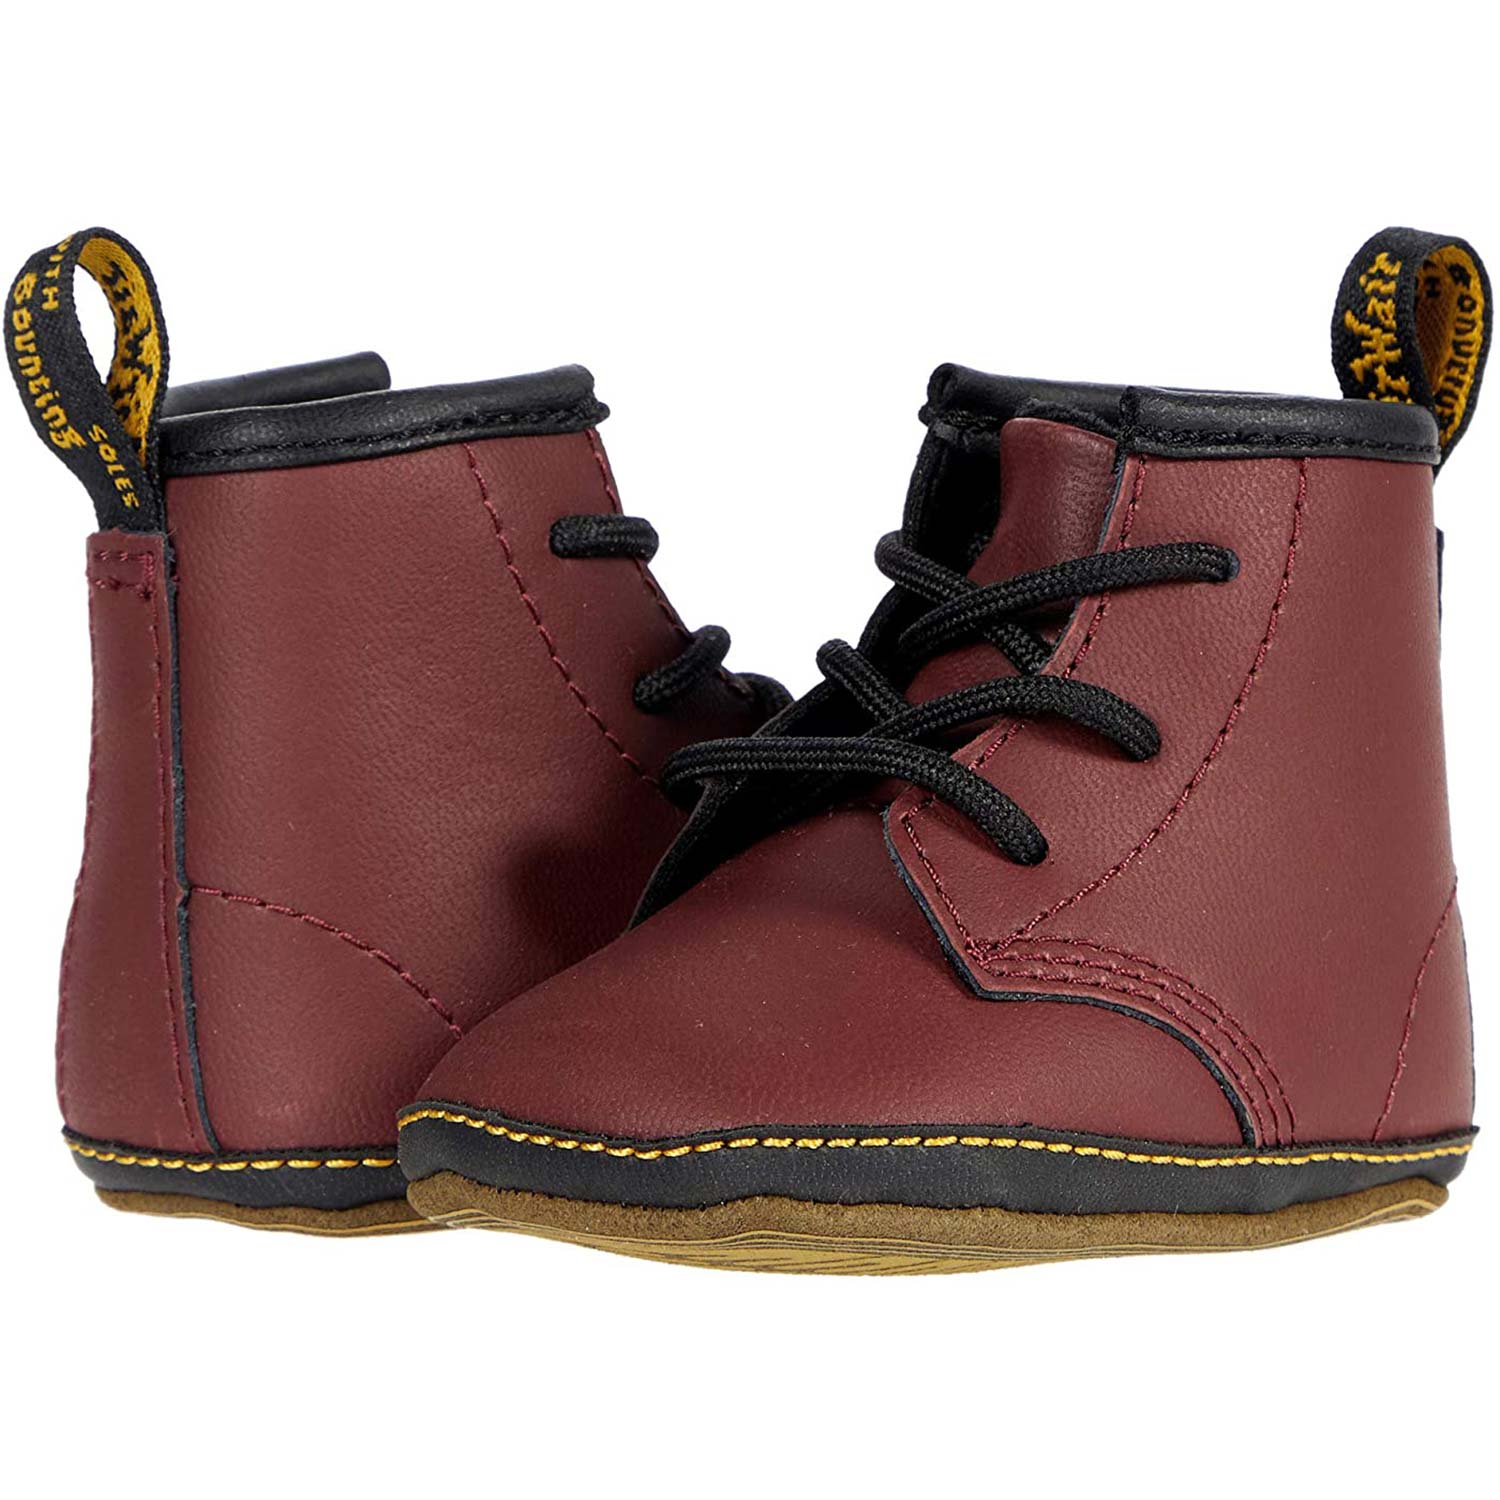 Dr. Martens Kids Collection 1460 Crib